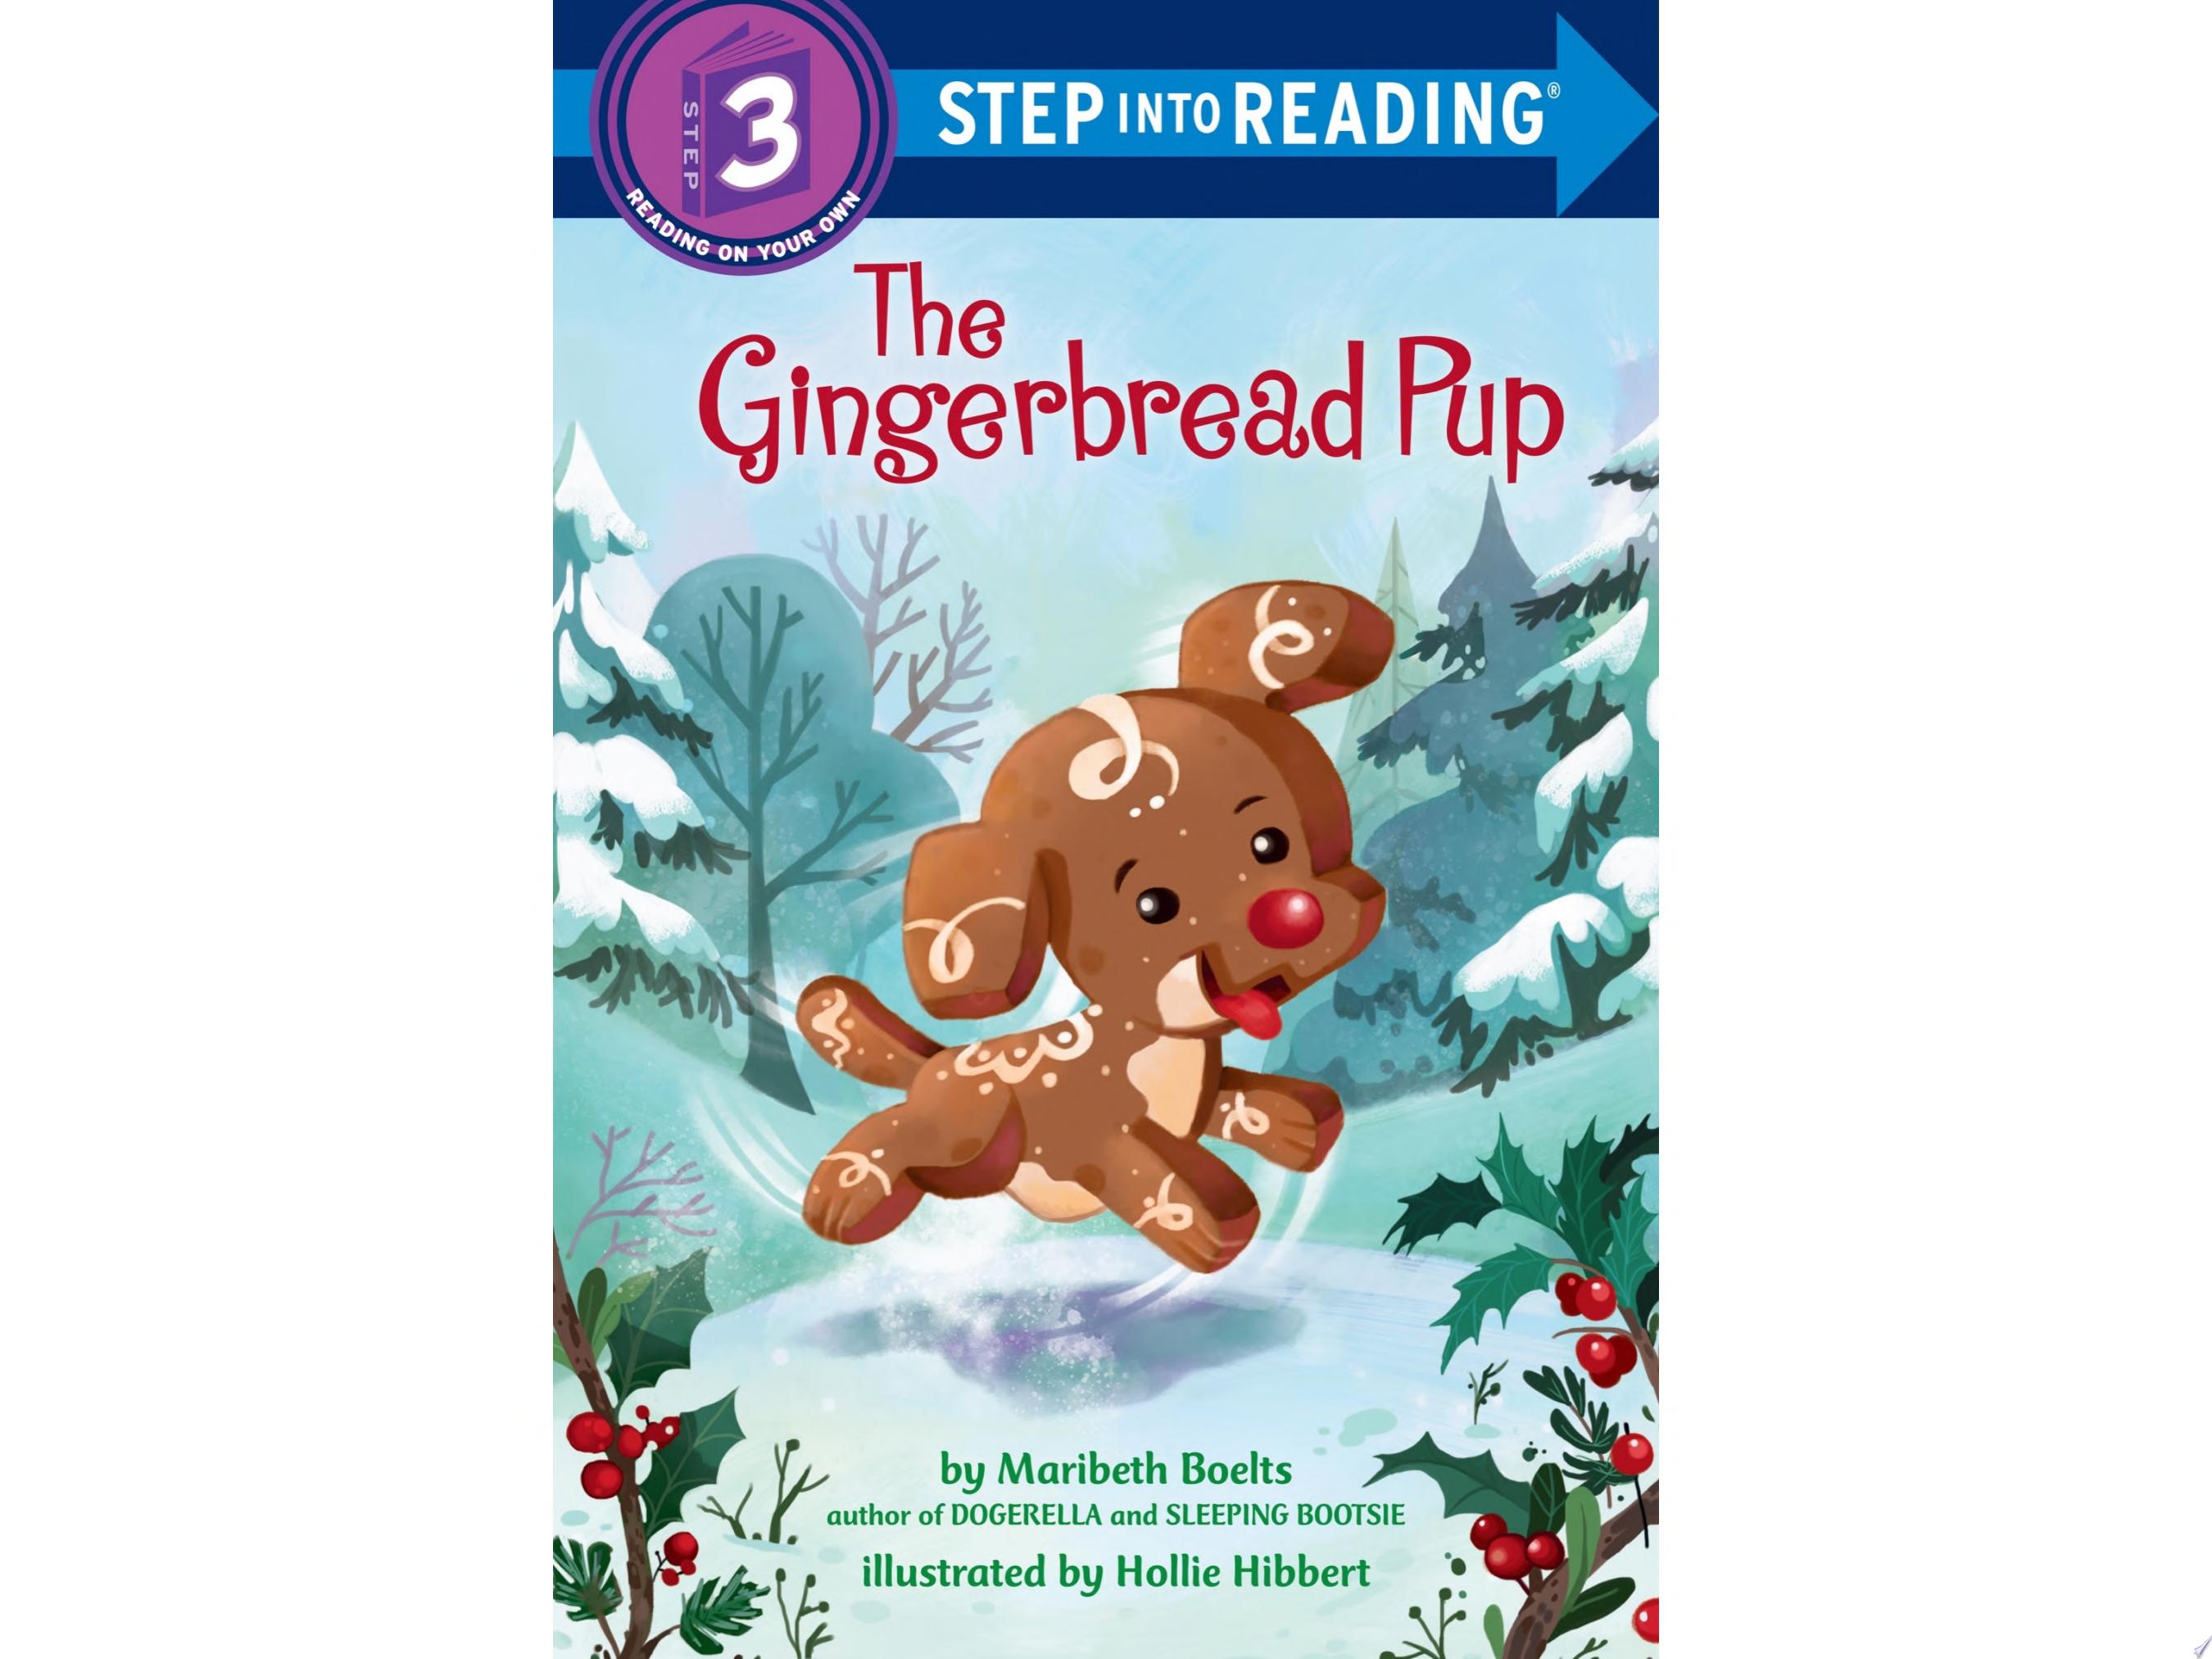 Image for "The Gingerbread Pup"